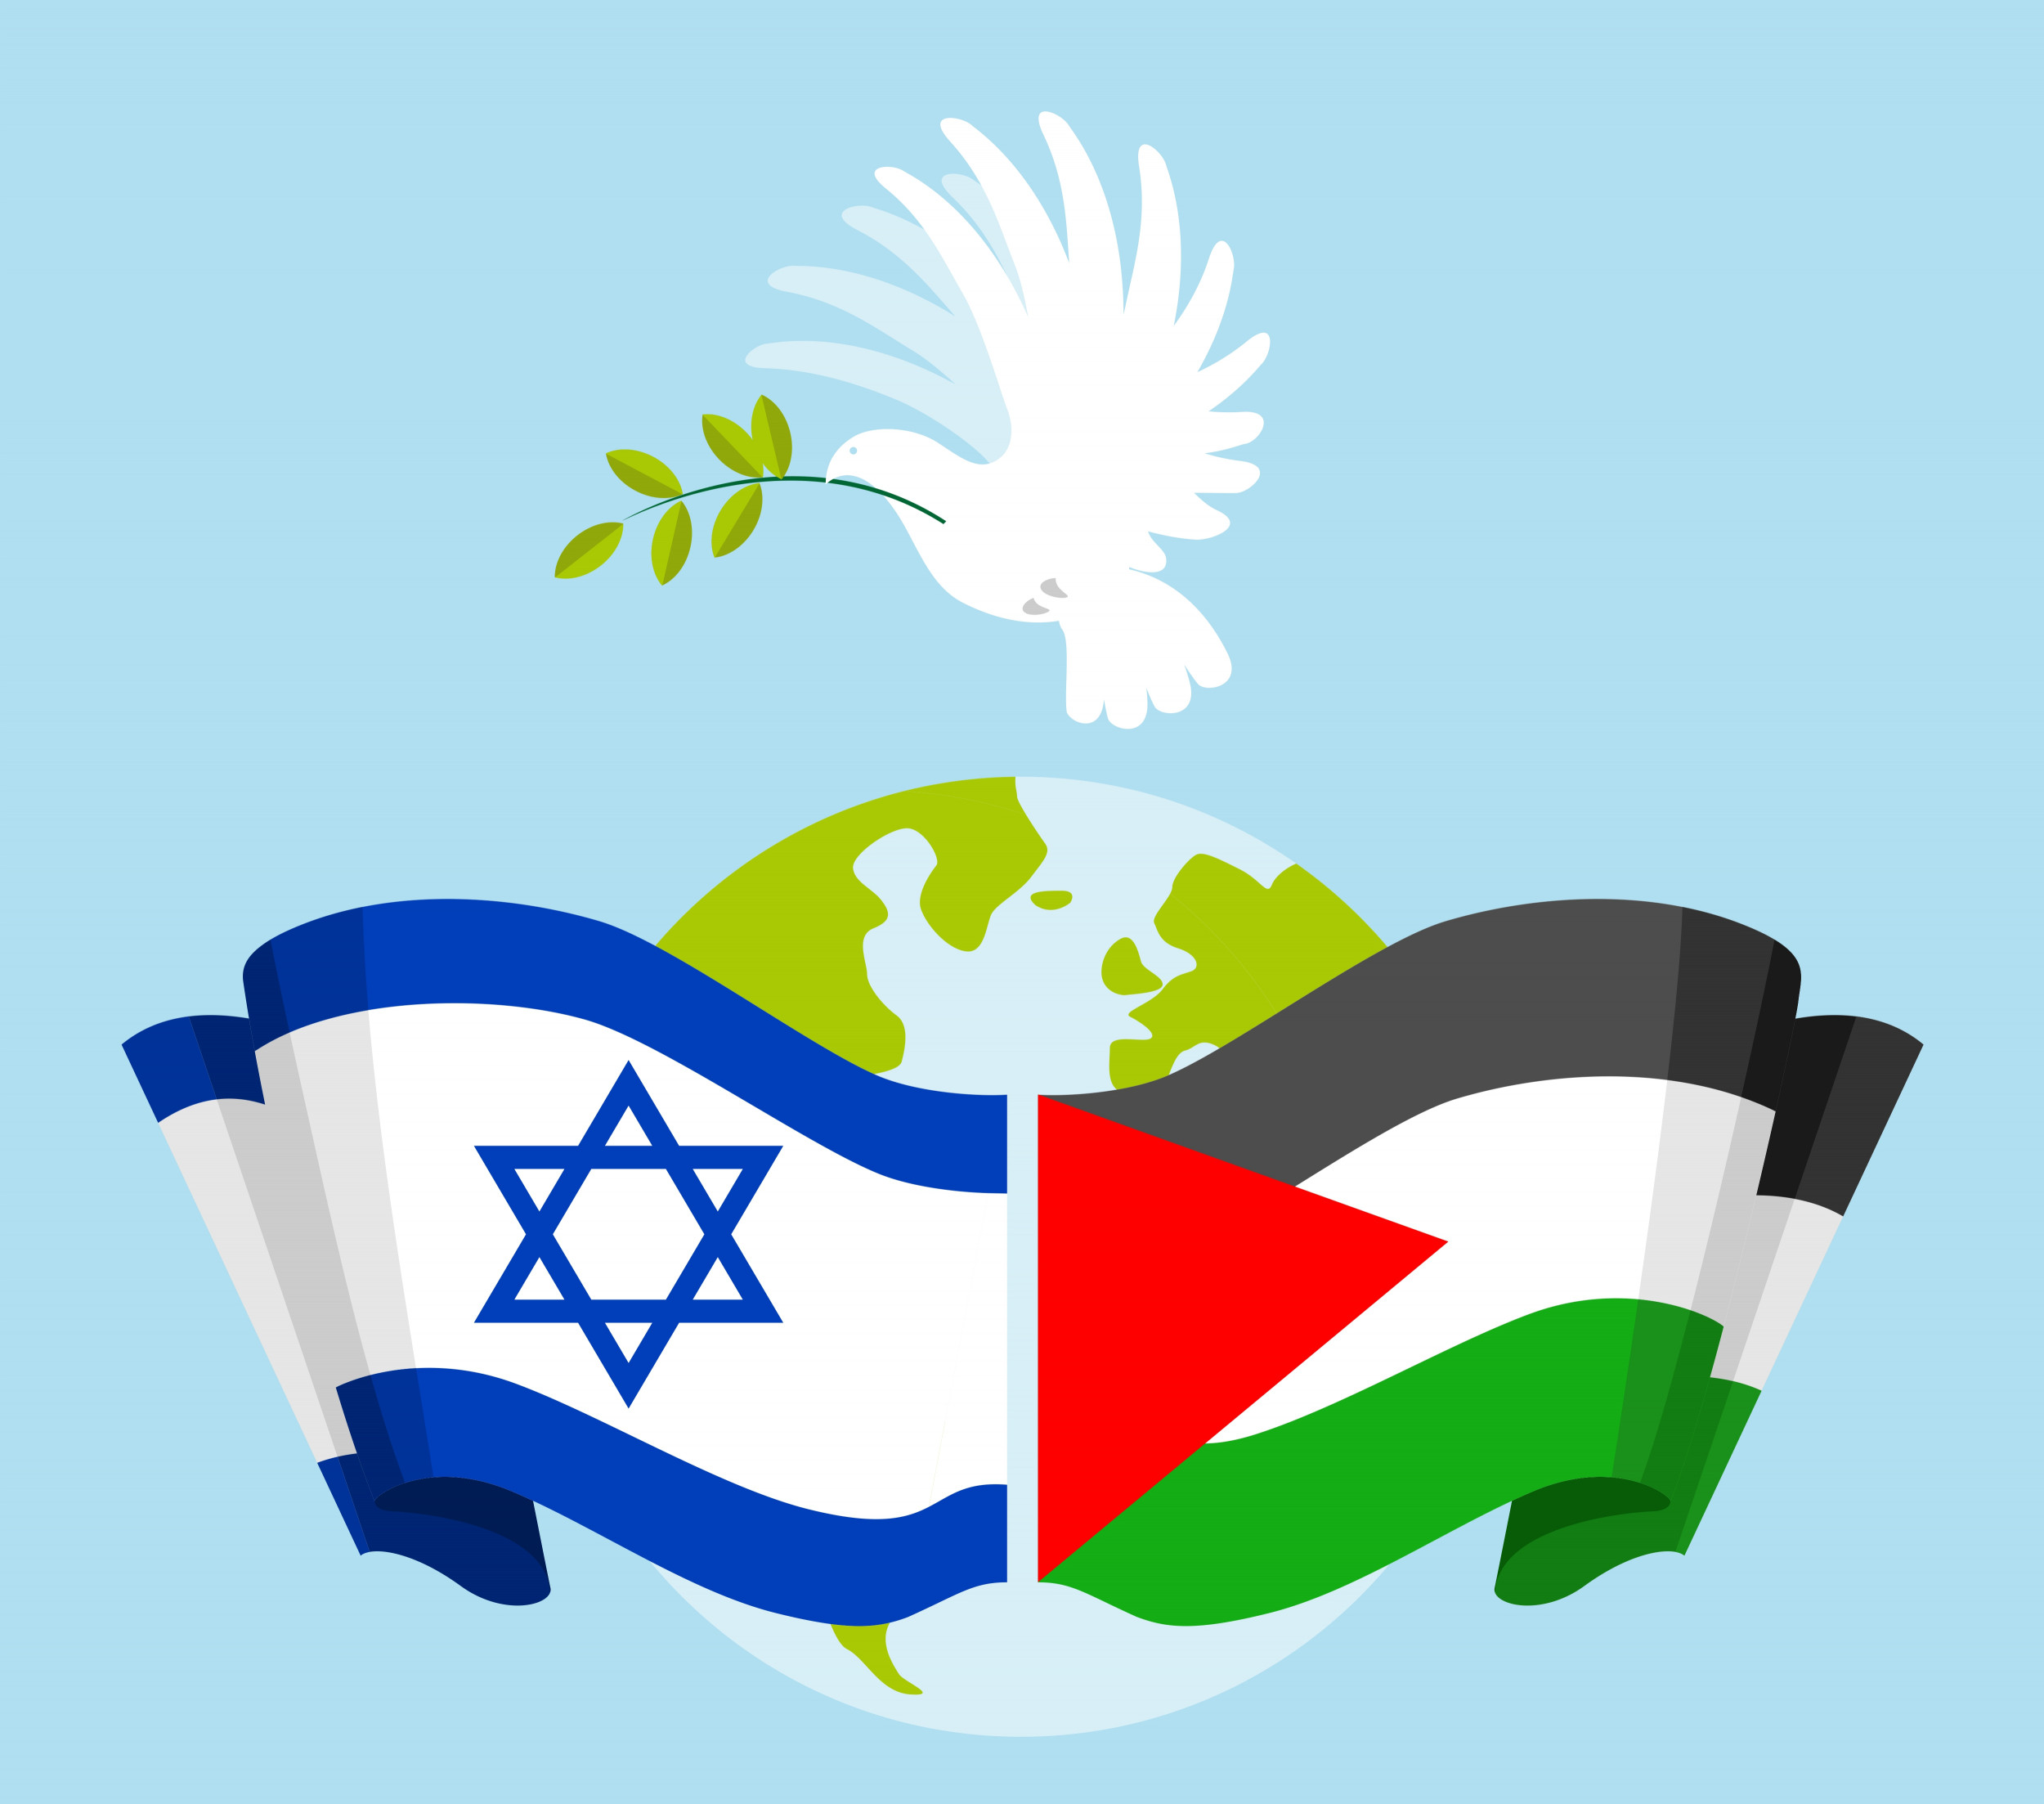 palestine-state-official-symbol-arabic-peace-palestinian-arab-other